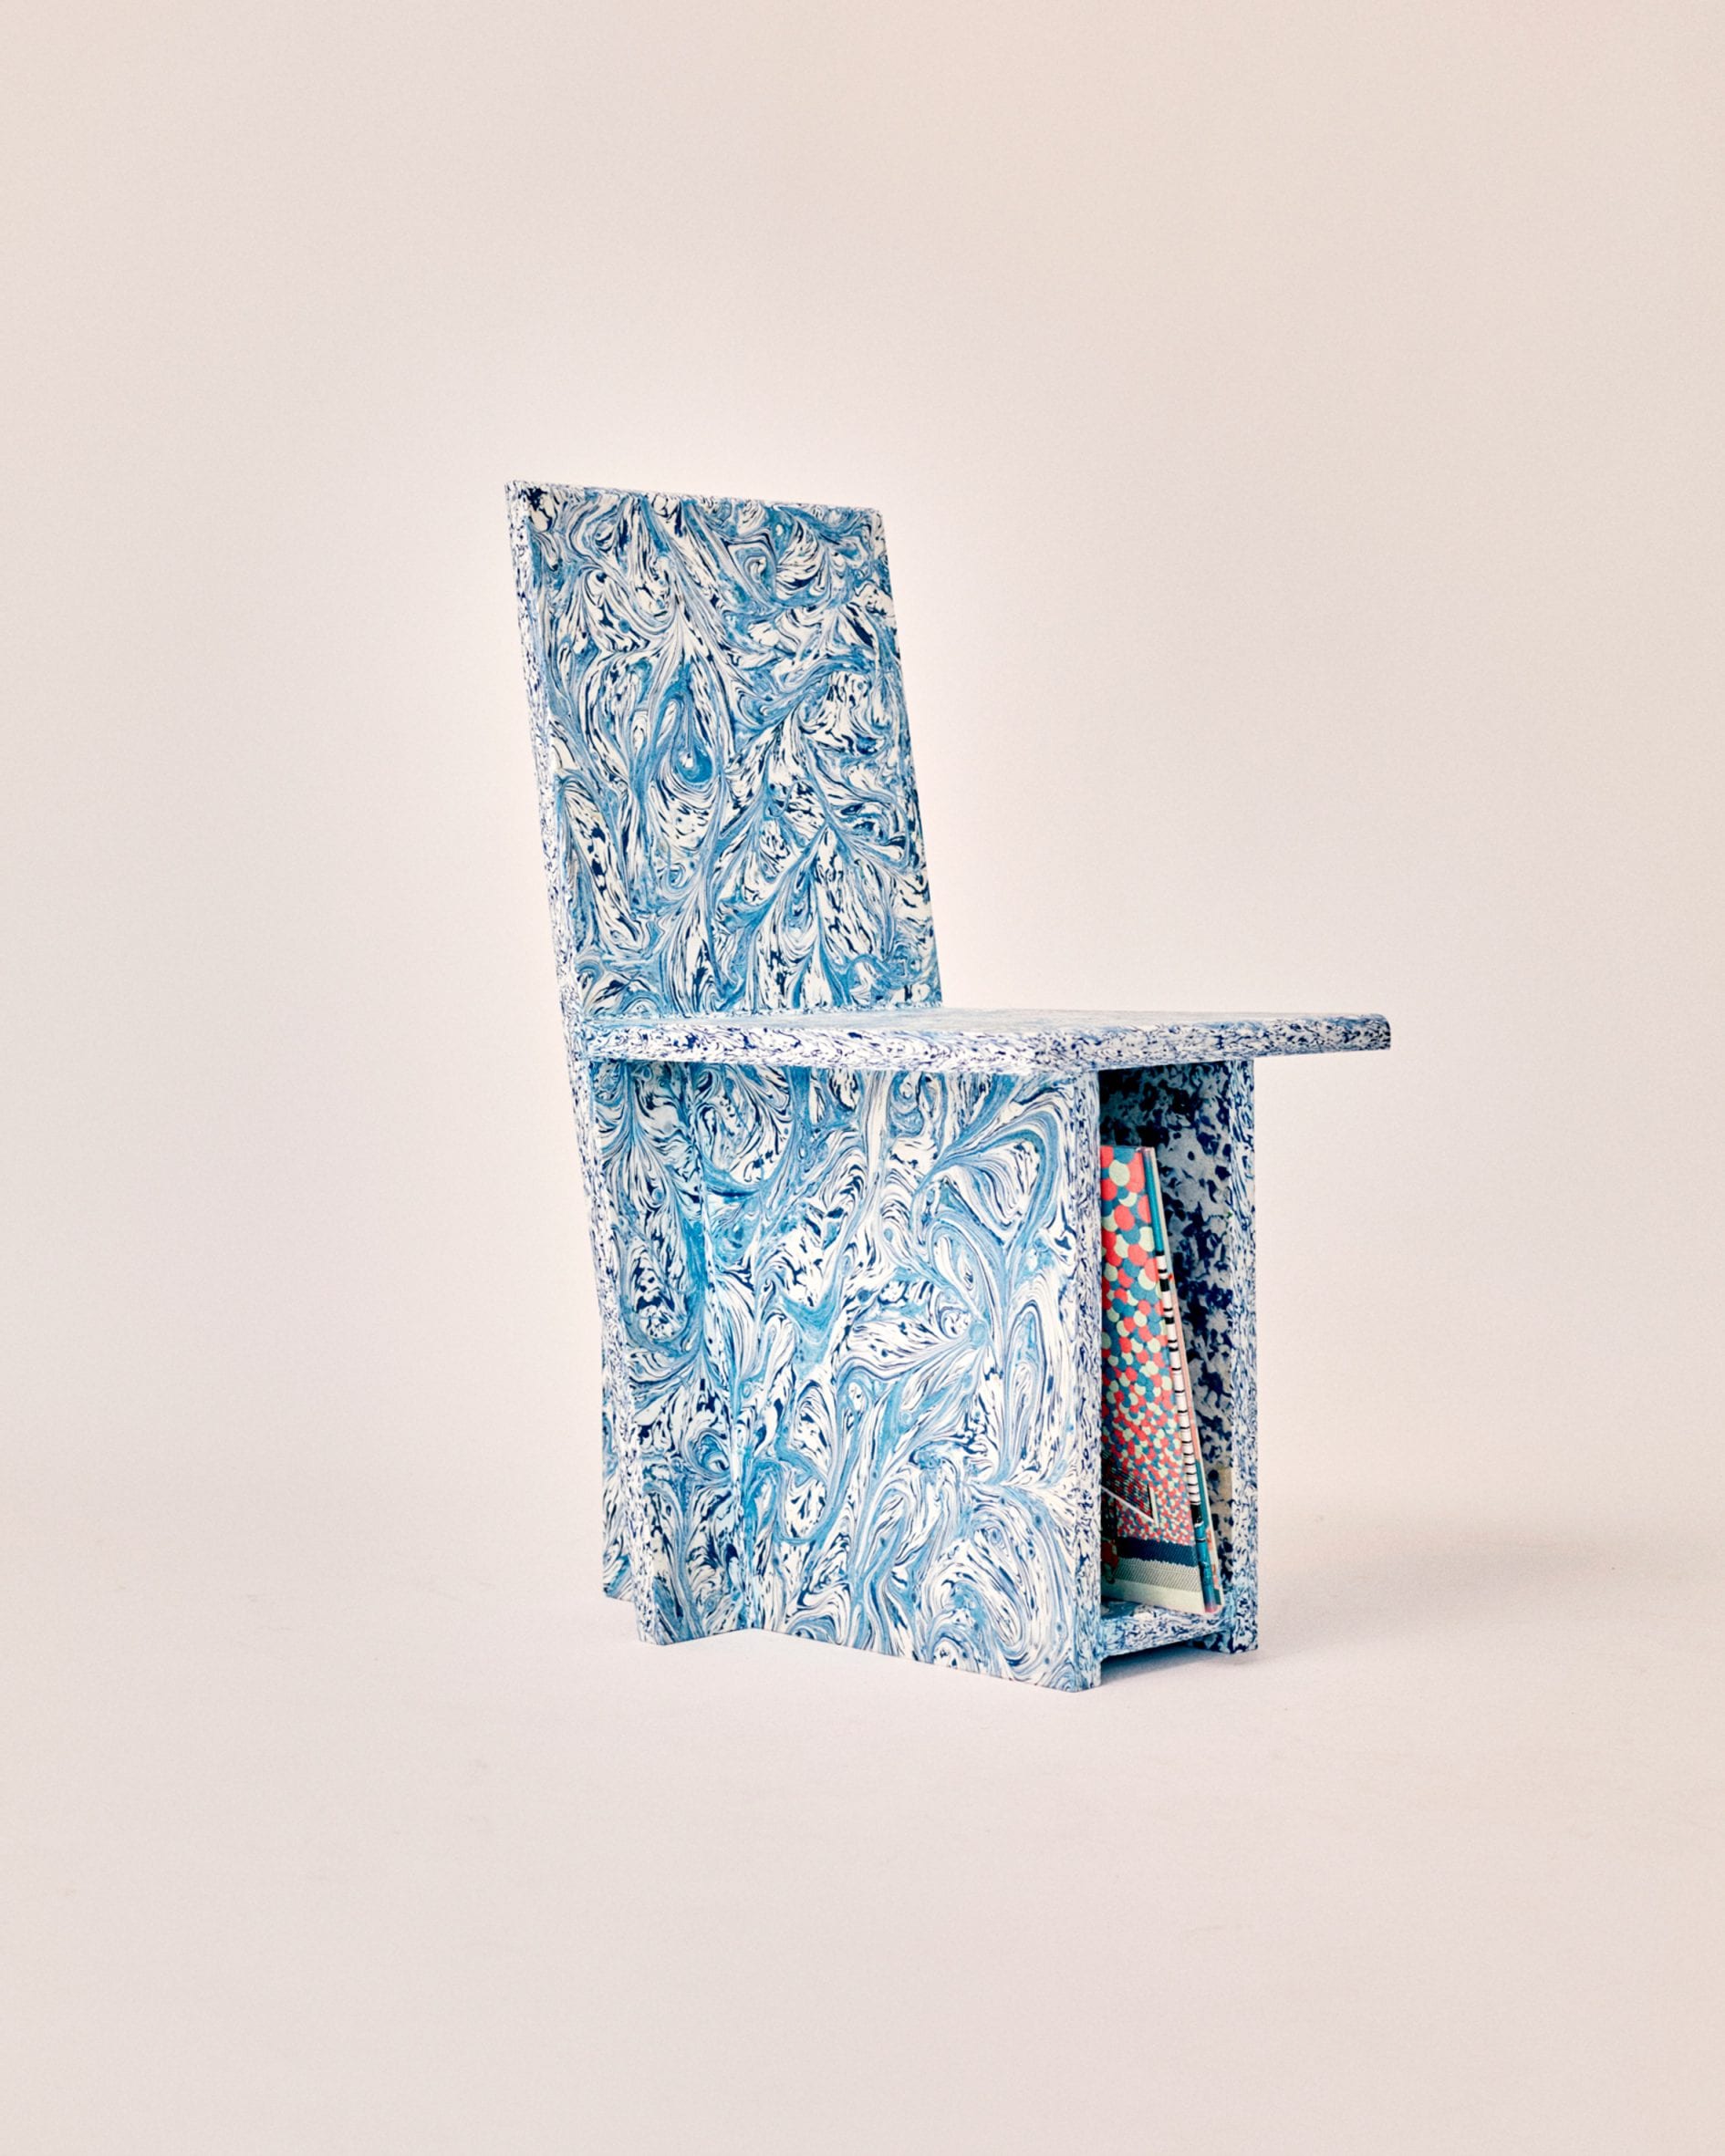 Trash to Chair made from recycled plastic with swirly blue pattern and vinyl storage